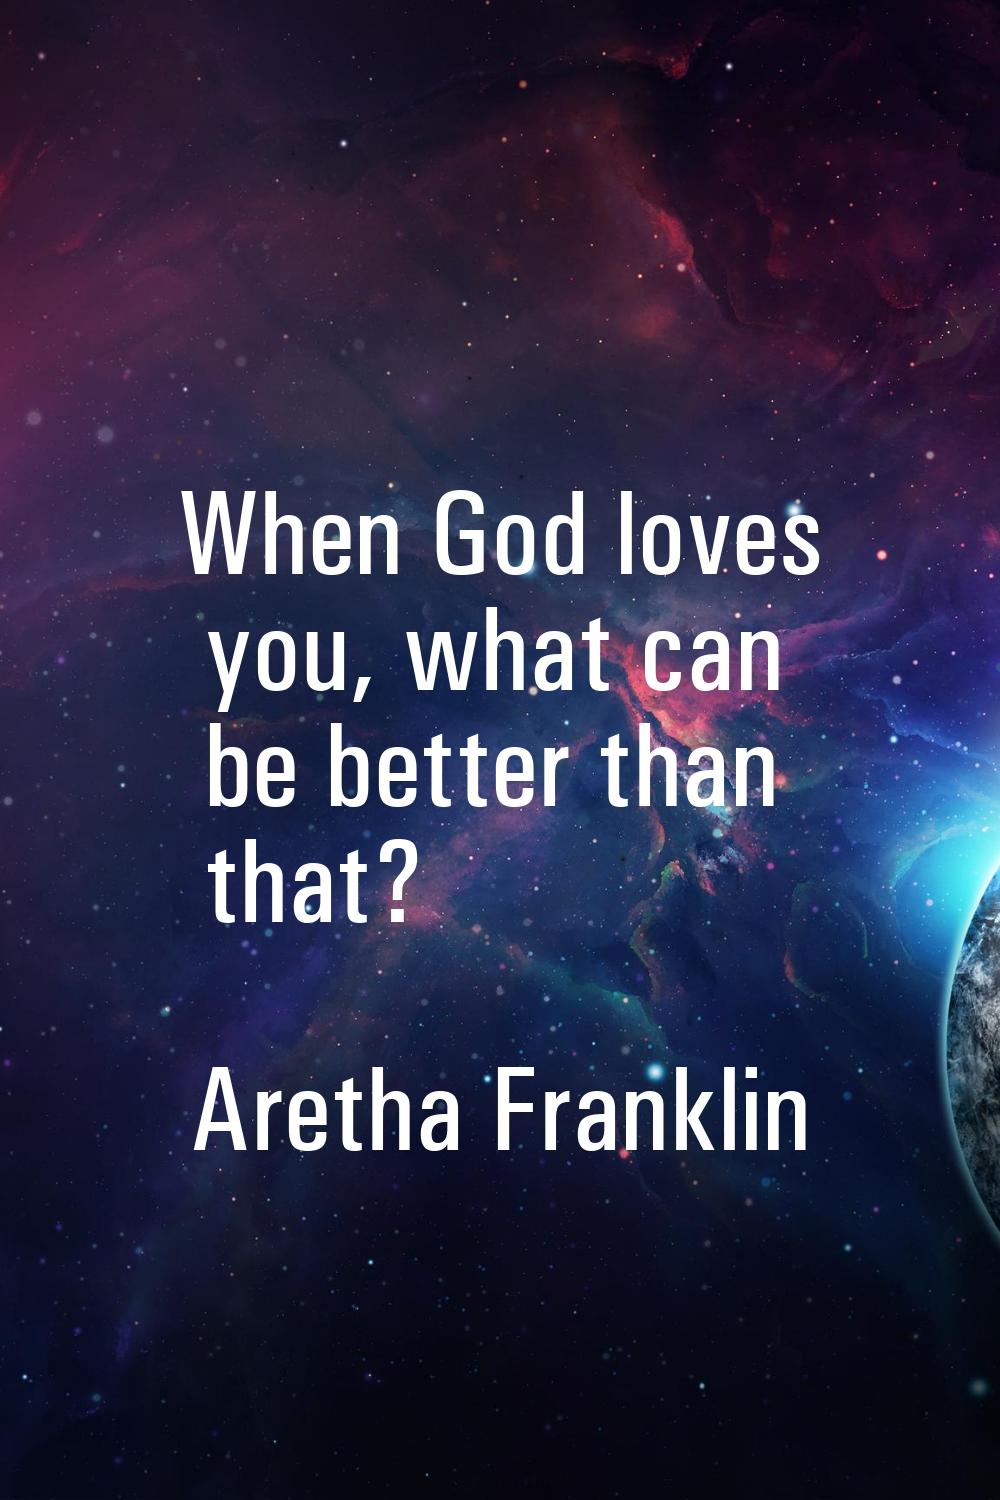 When God loves you, what can be better than that?